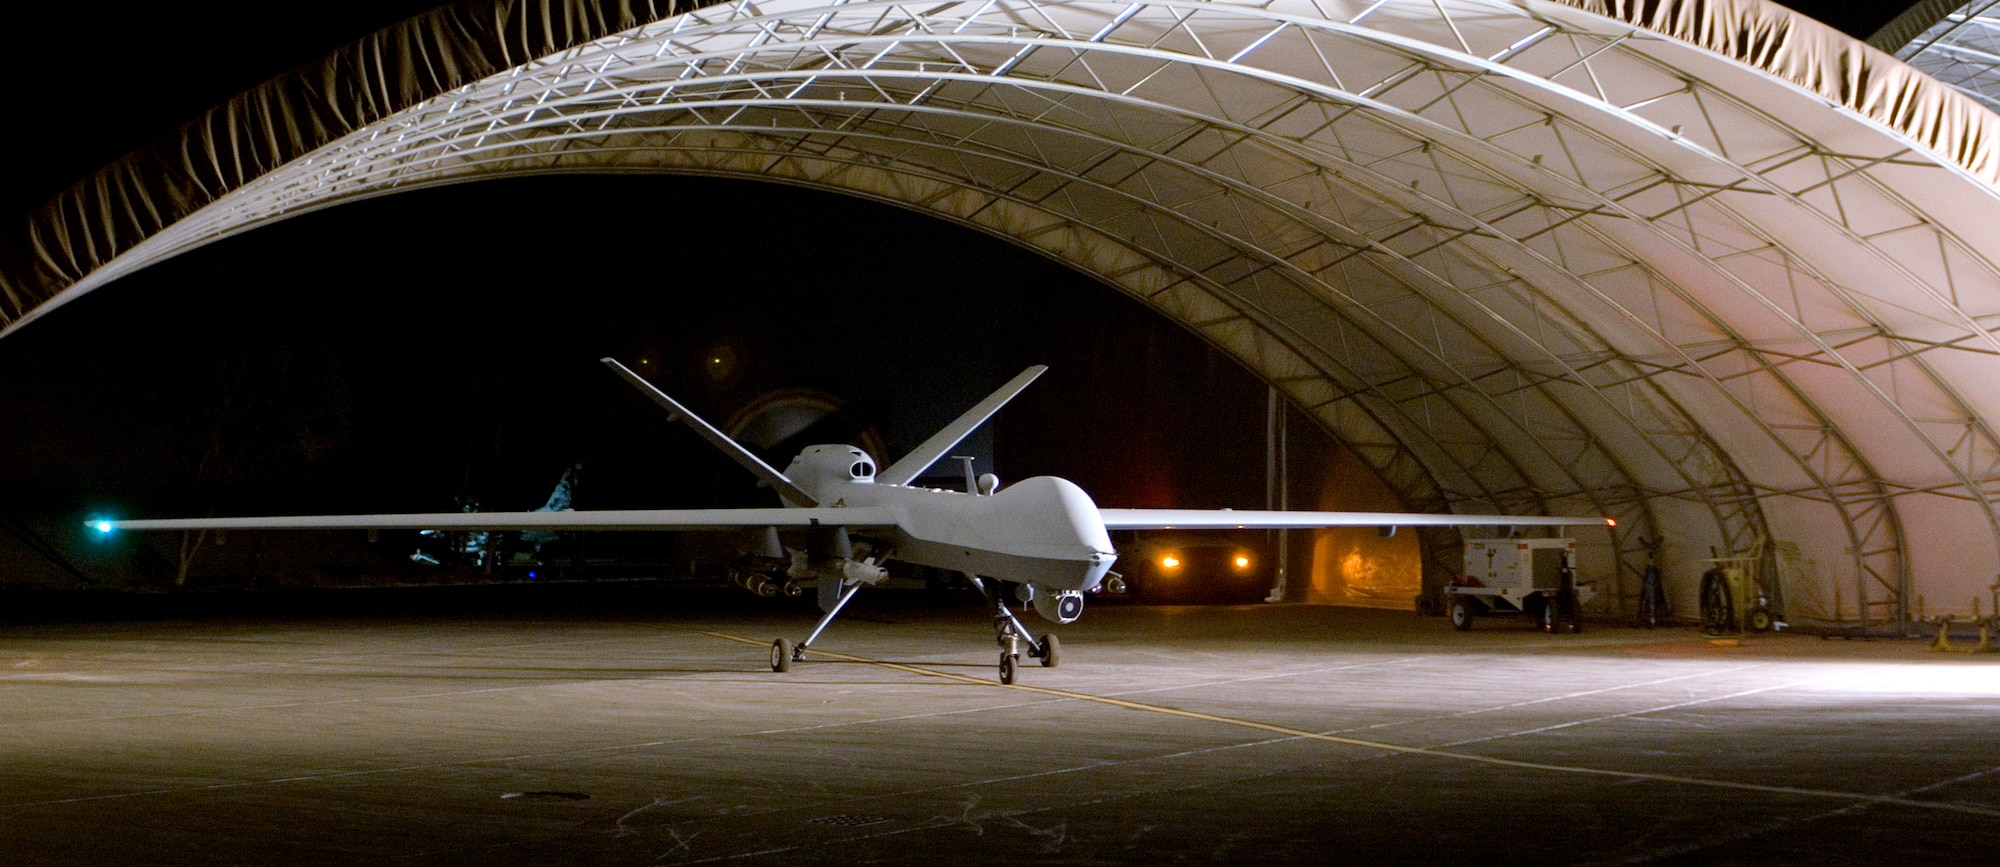 An MQ-9 Reaper remotely piloted aircraft prepares to taxi out of a hangar Aug. 8 at Joint Base Balad, Iraq. A Reaper employed a 500-pound GBU-12 laser-guided bomb against anti-Iraqi forces Aug. 16, marking the Reaper's first weapons engagement since it began flying combat sorties over Iraq July 18. (U.S. Air Force photo/Tech. Sgt. Erik Gudmundson) 
